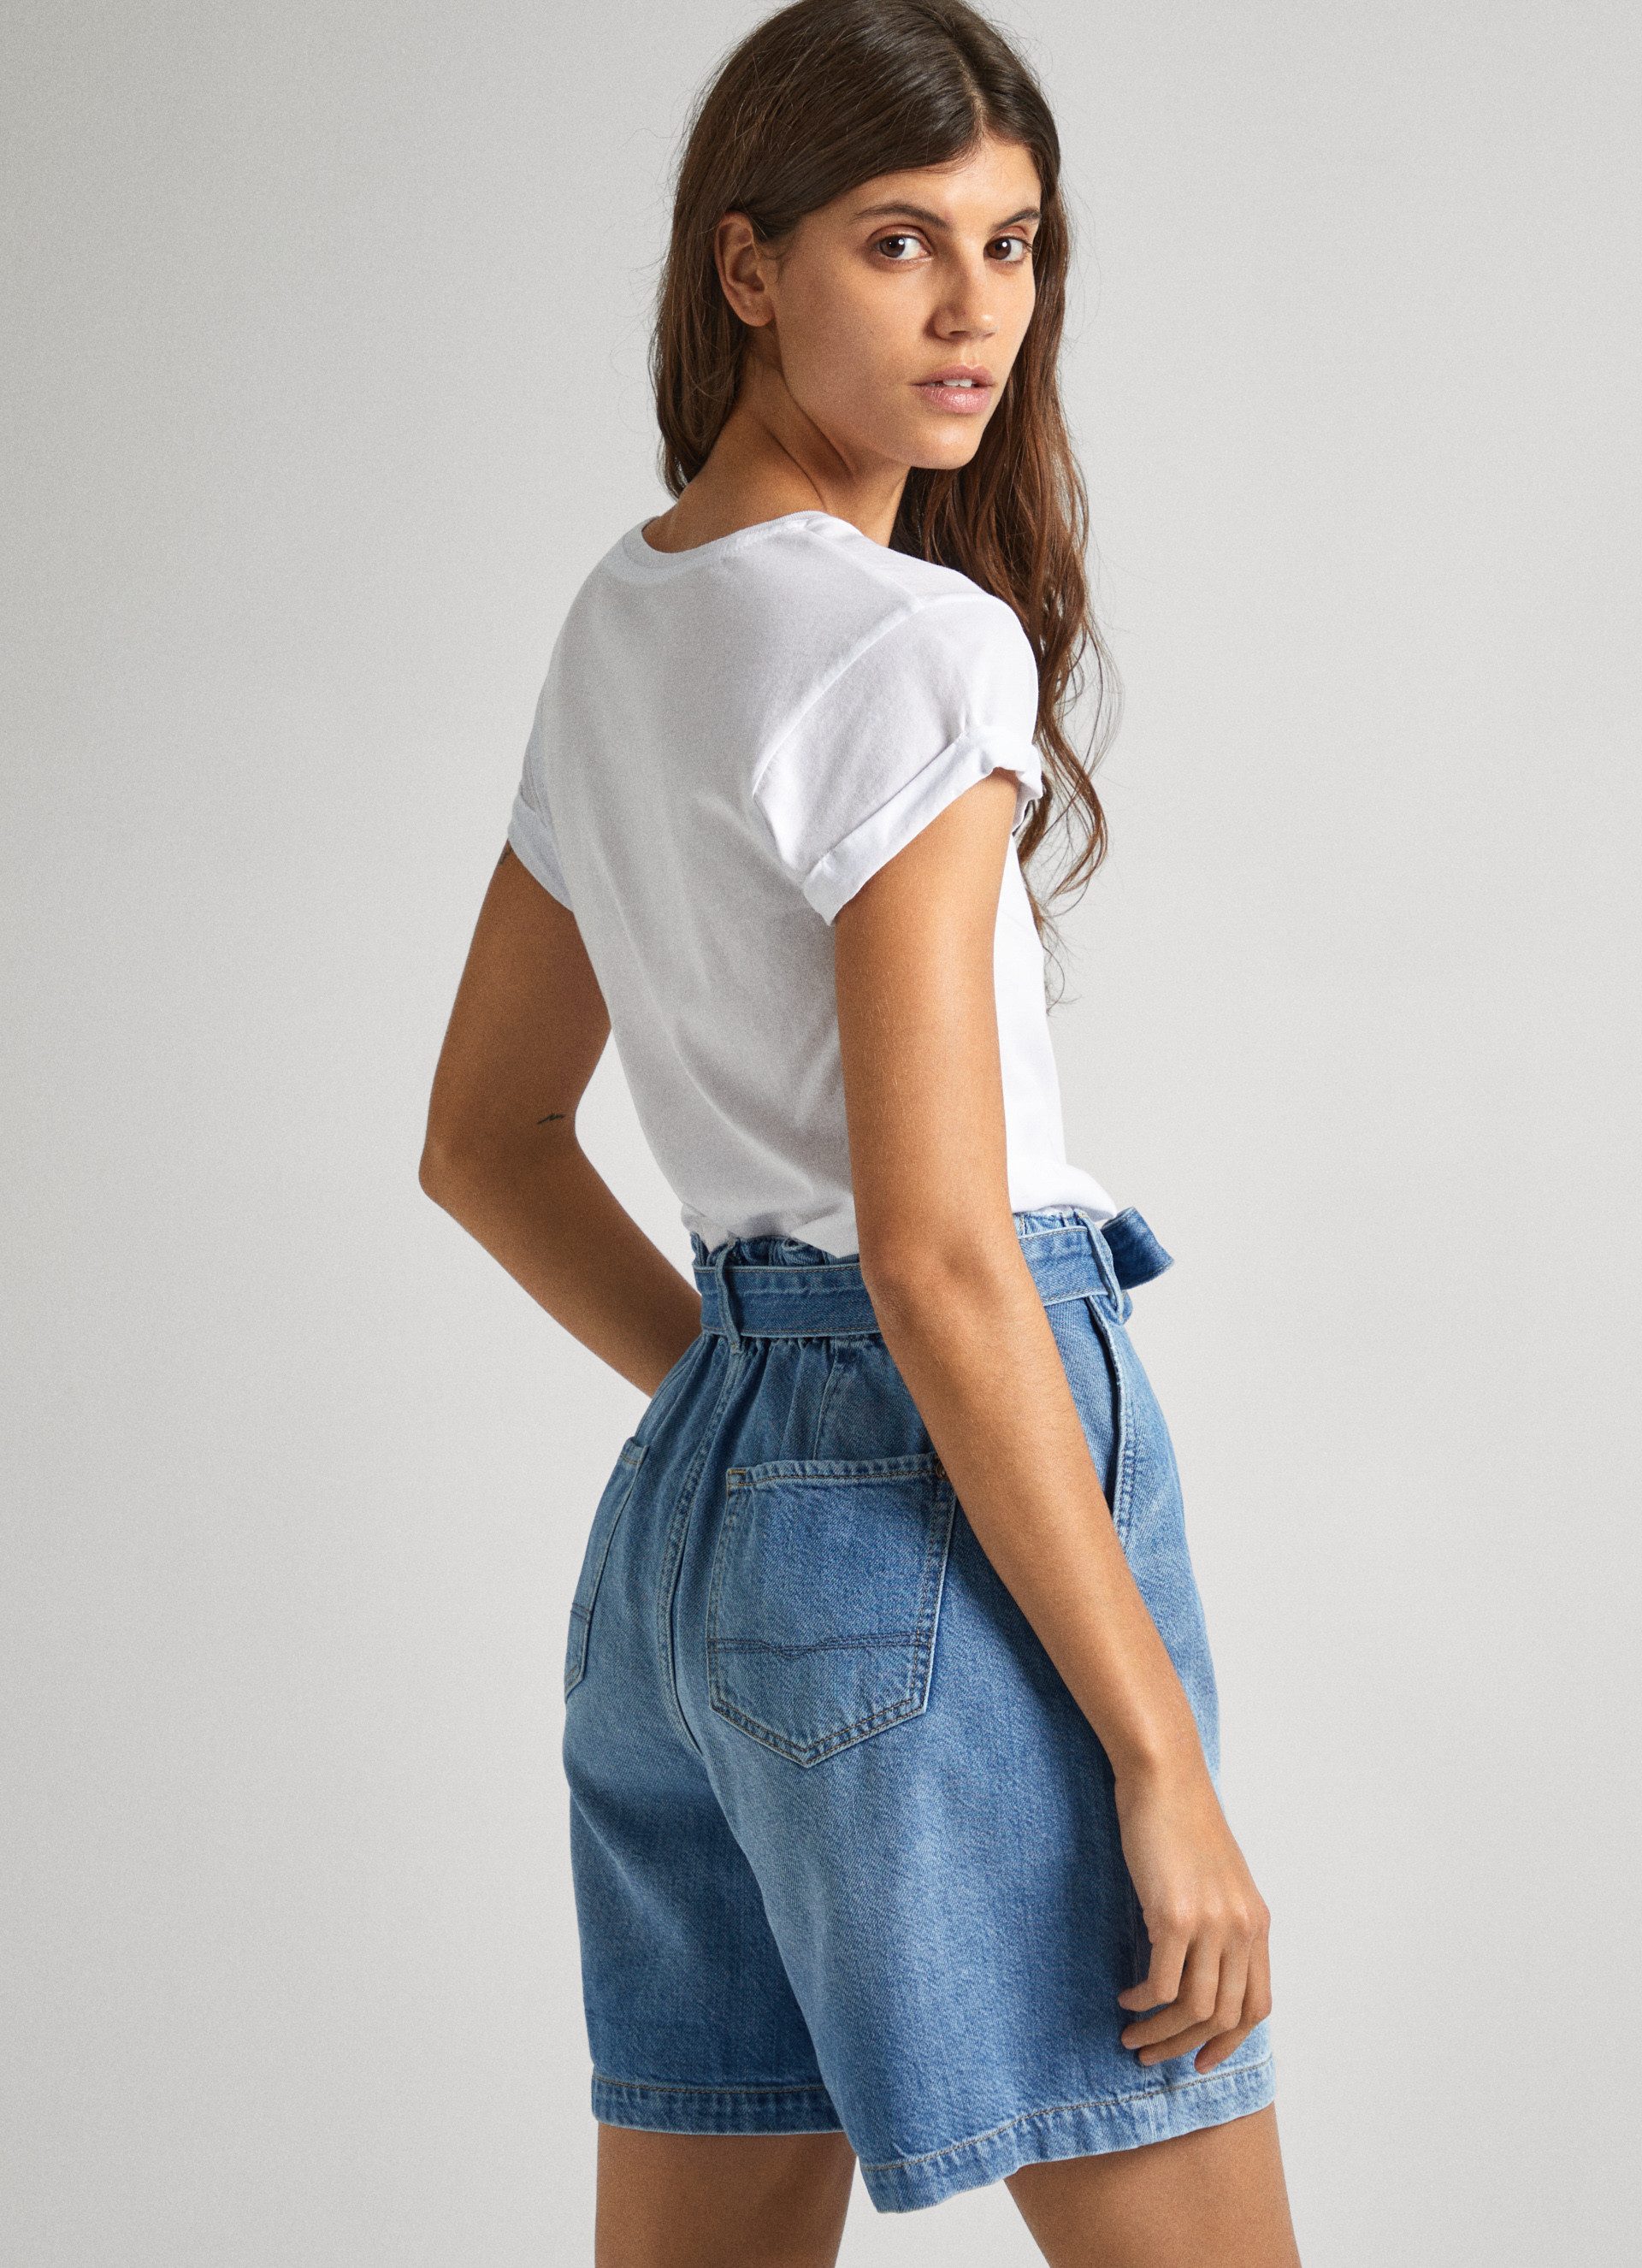 Pepe Jeans T-shirt JANET